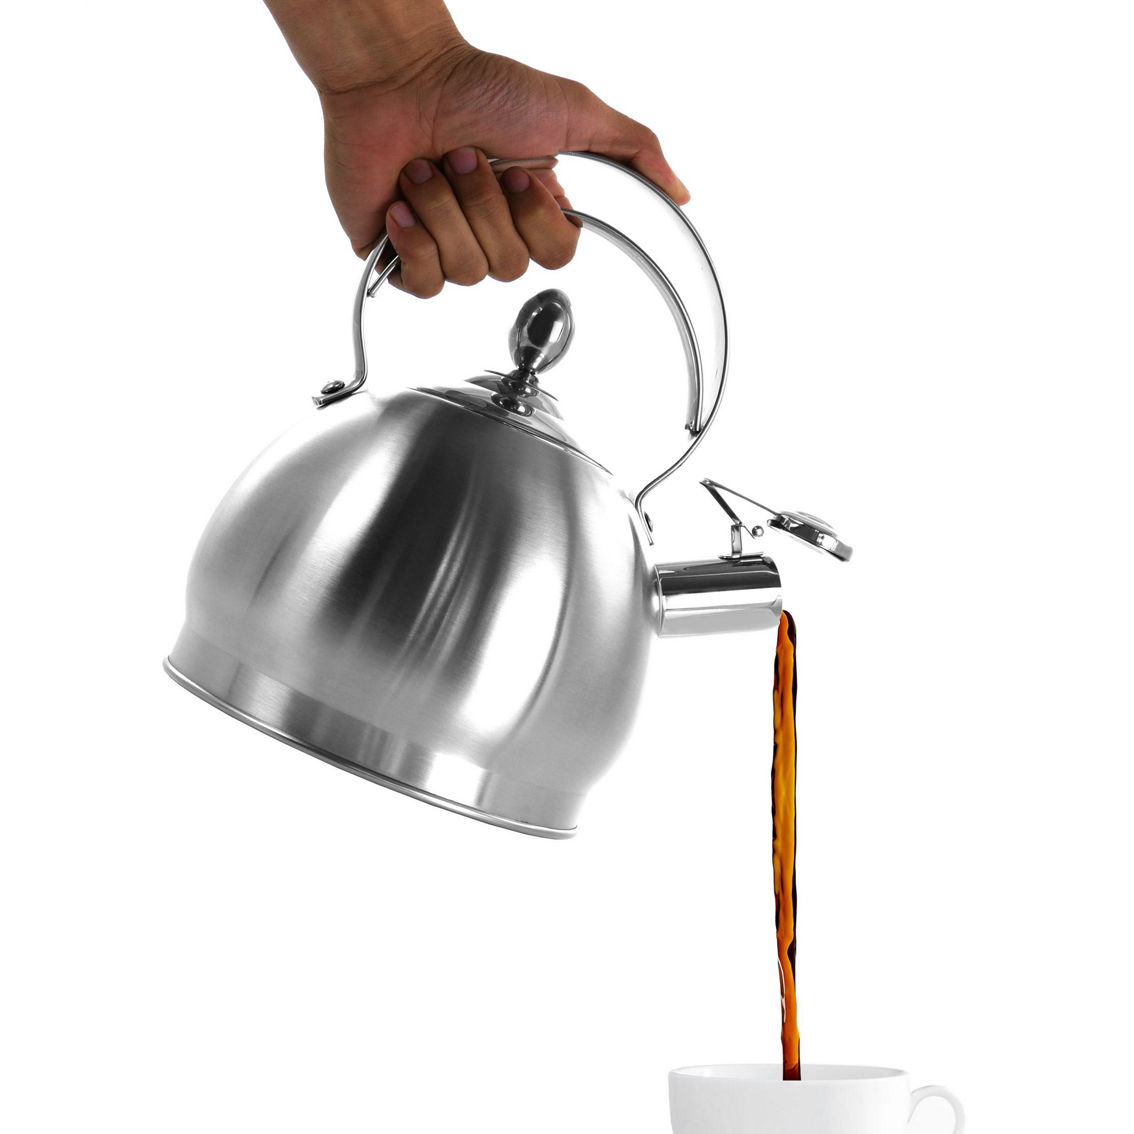 MegaChef 2.8 Liter Round Stovetop Whistling Kettle in Brushed Silver - Image 2 of 5